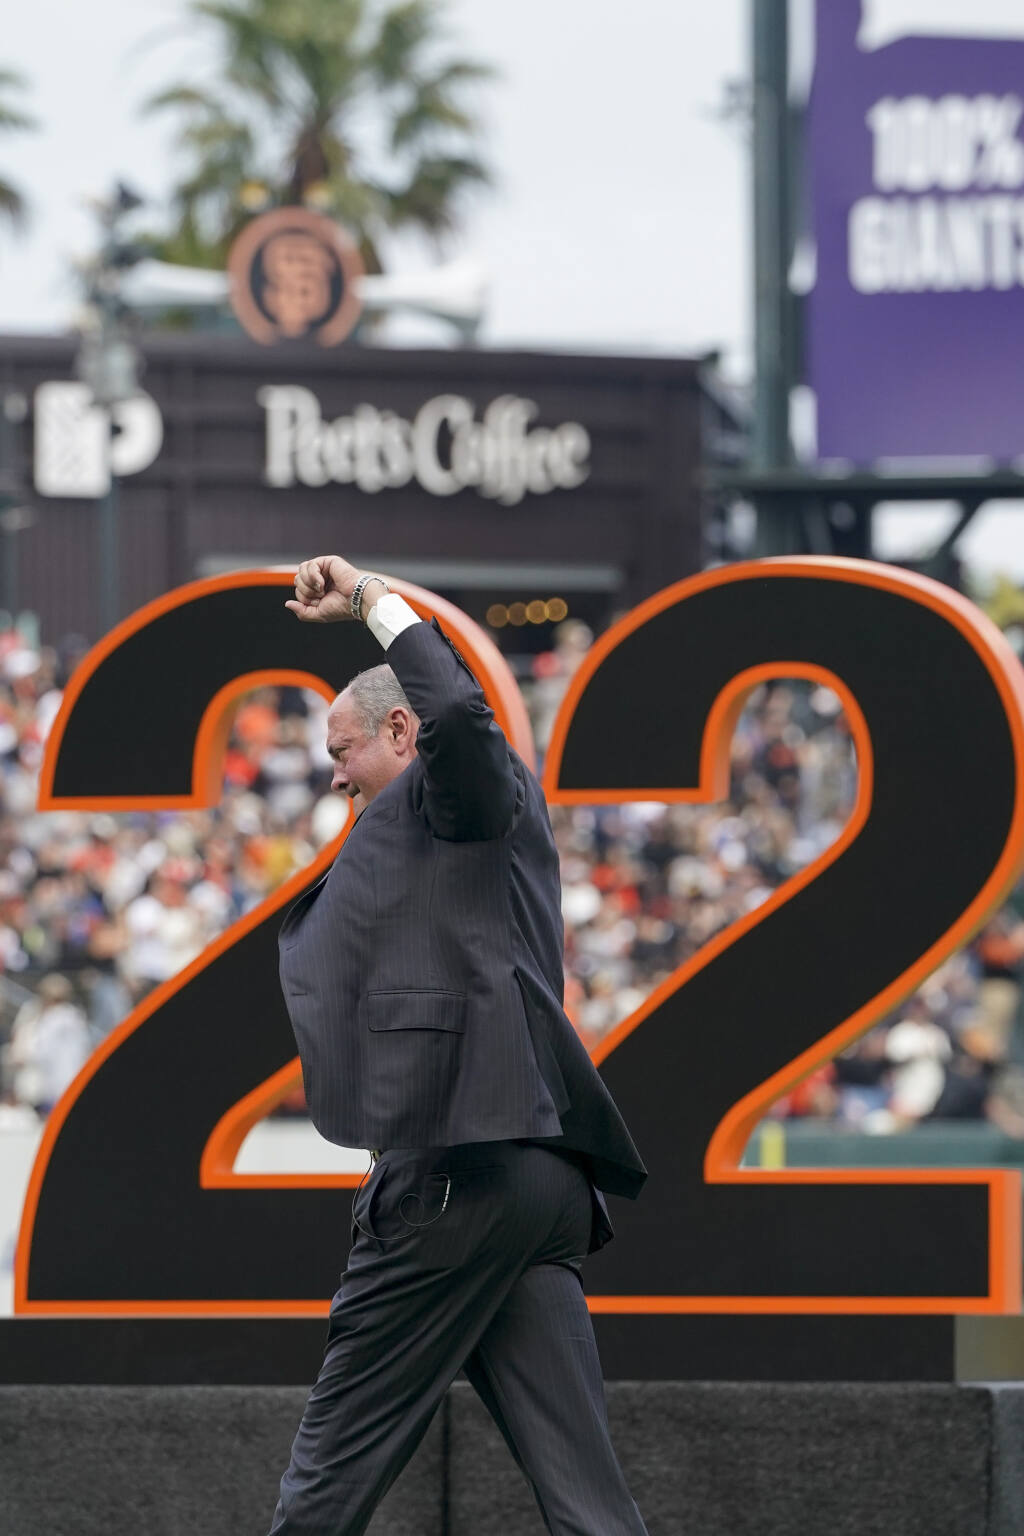 Giants to retire Will Clark's number 22, 1989 team honored - ABC7 San  Francisco